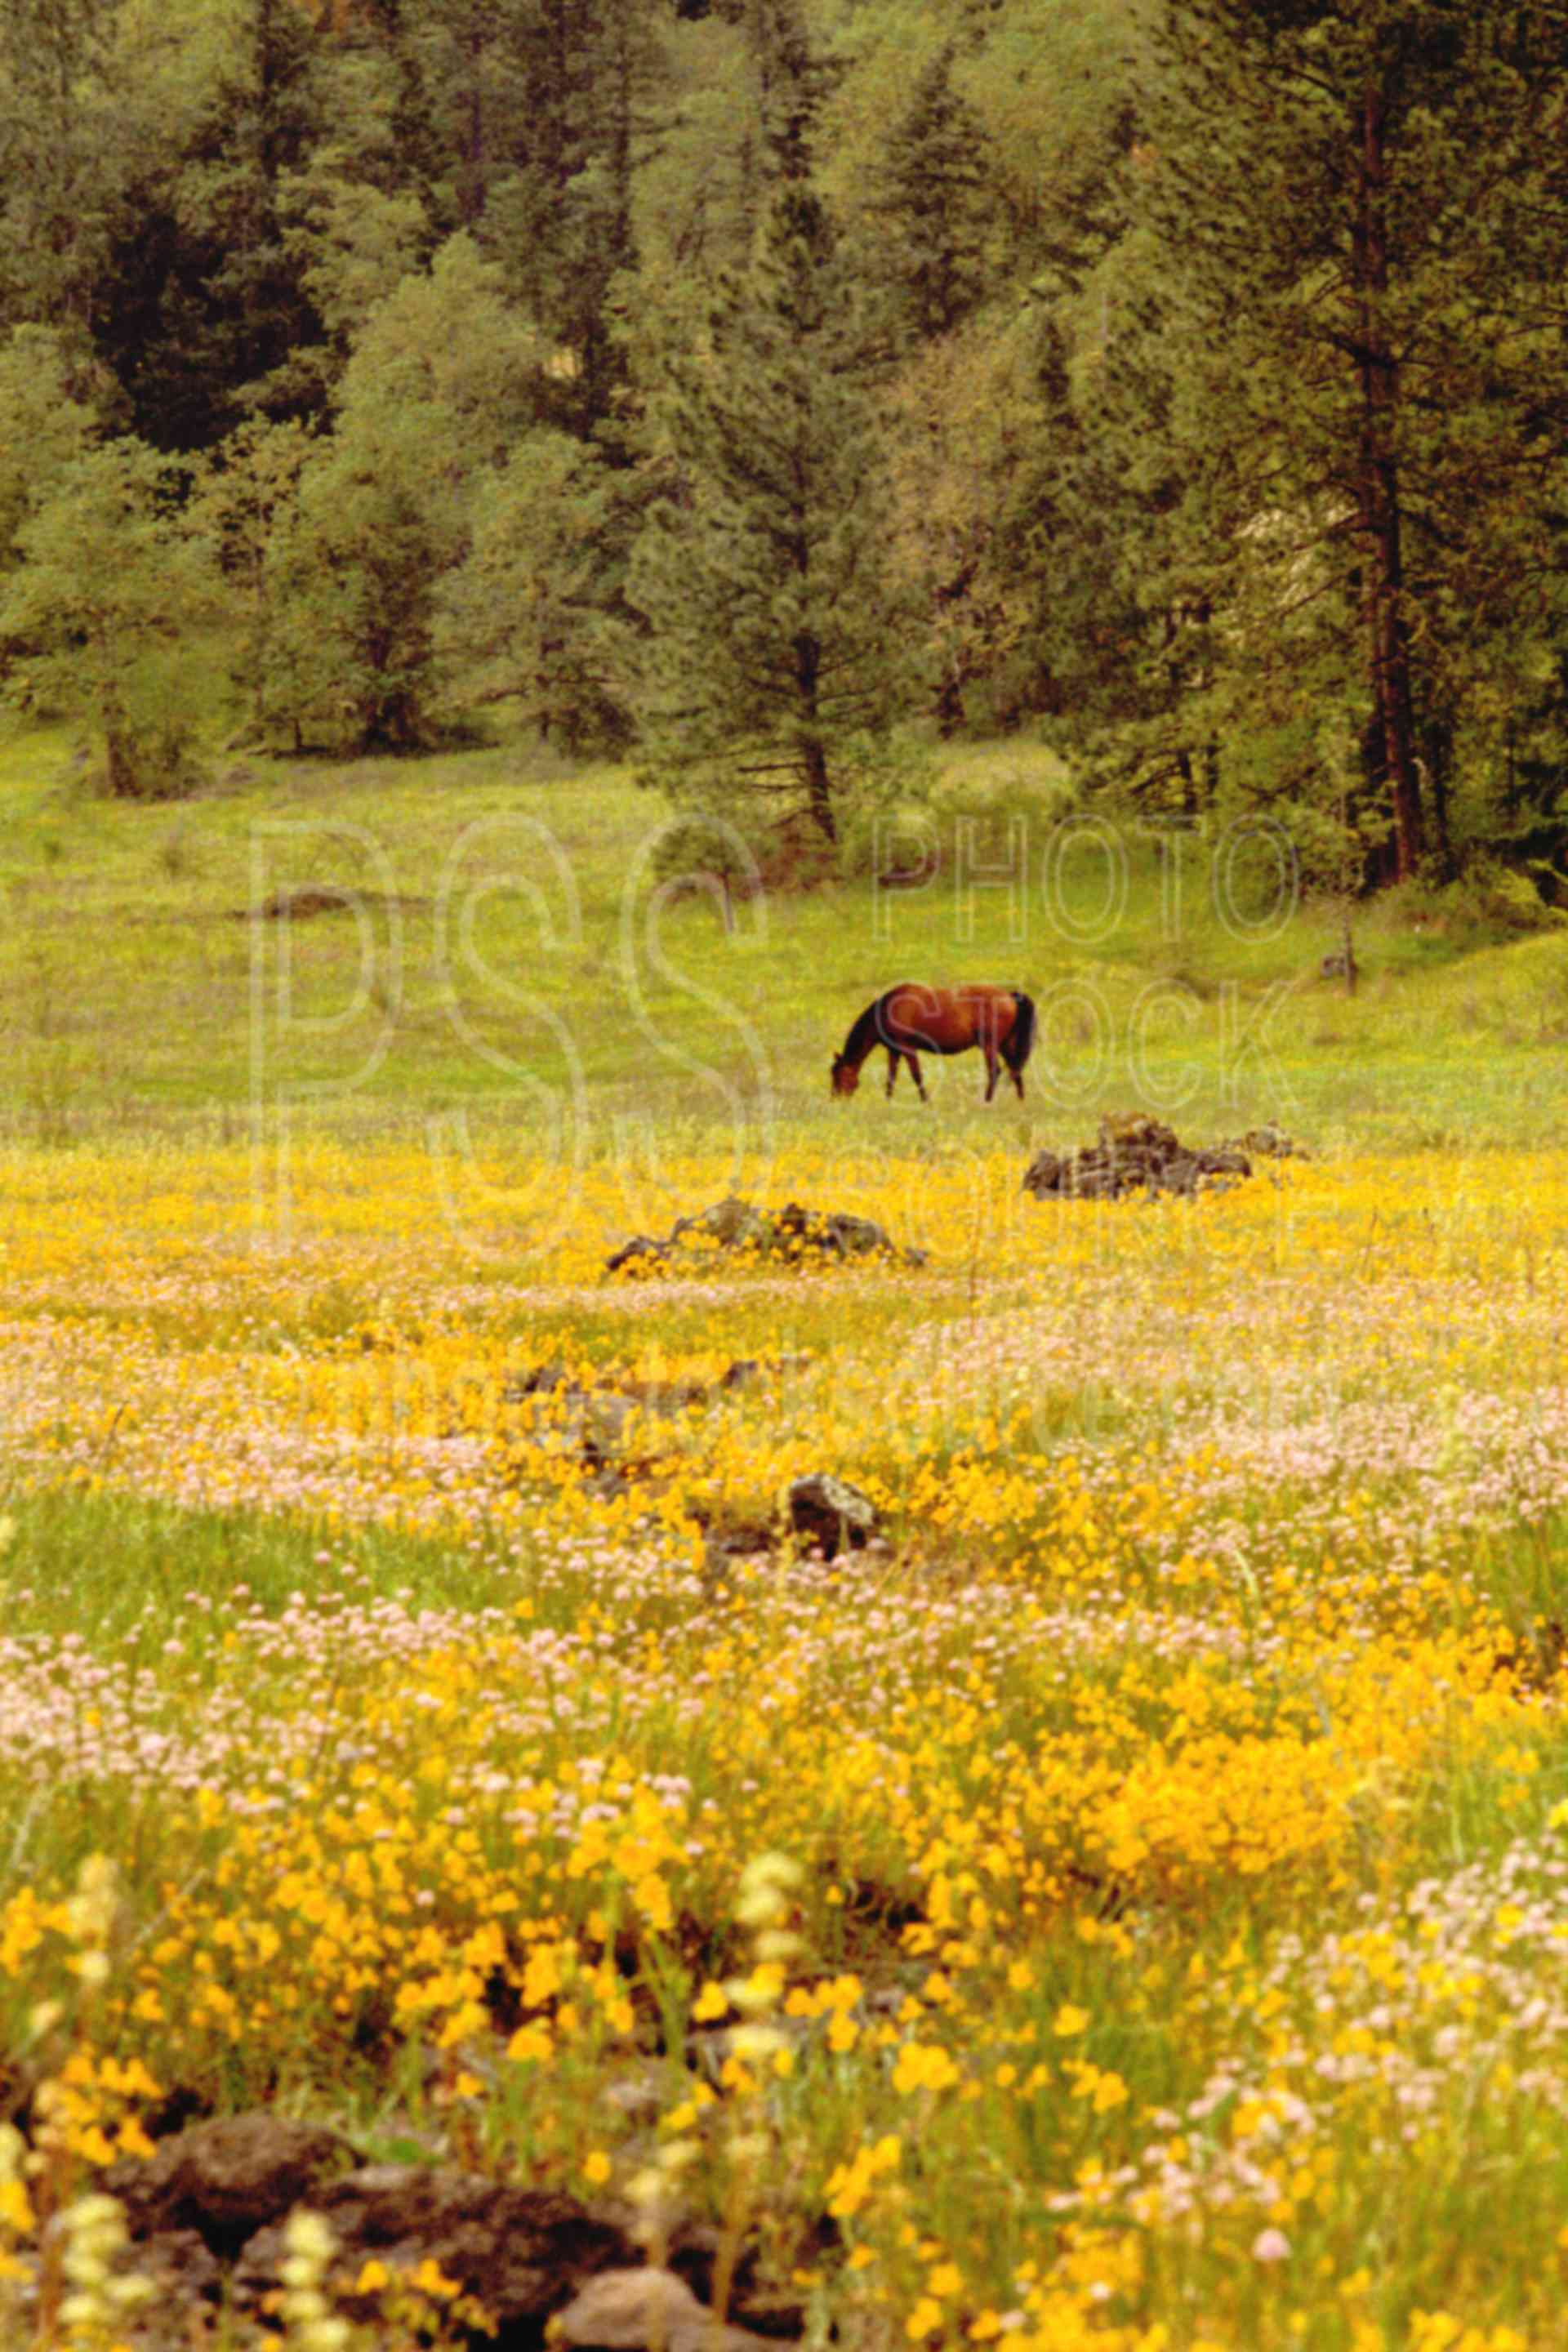 Horse and Wildflowers,flower,horse,wildflower,plant,usas,farms,plants